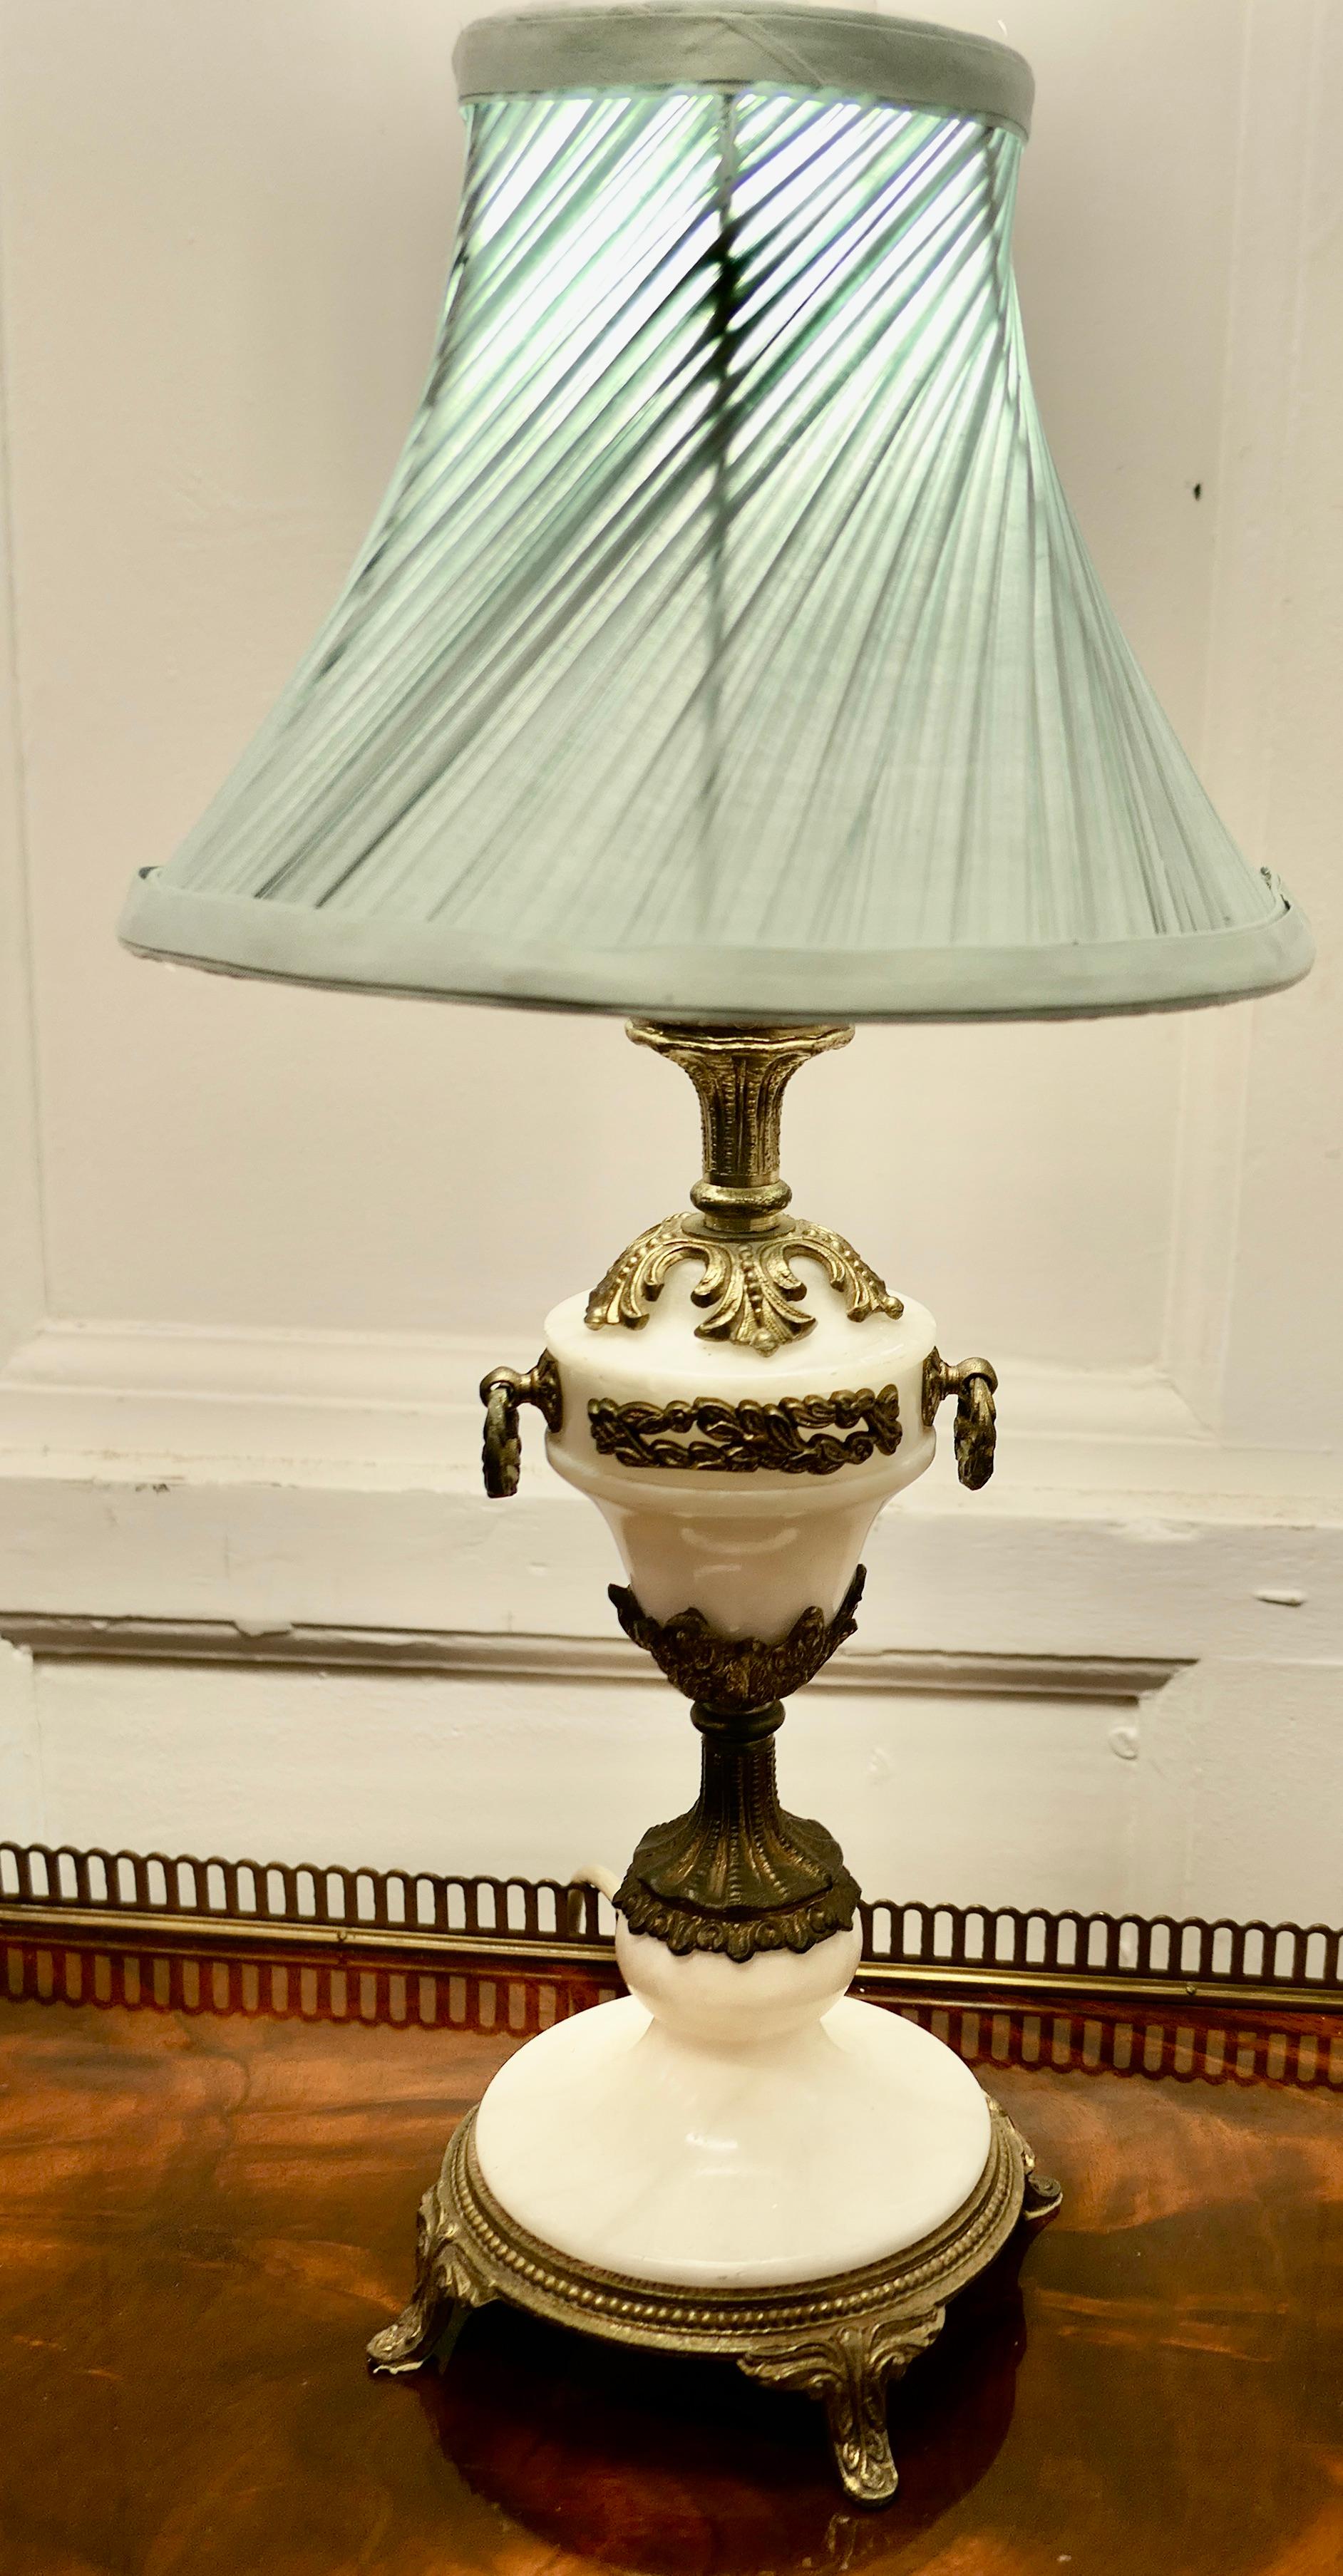 A Pair of White Marble and Ormolu Classical Greek Style Table Lamp   In Good Condition For Sale In Chillerton, Isle of Wight